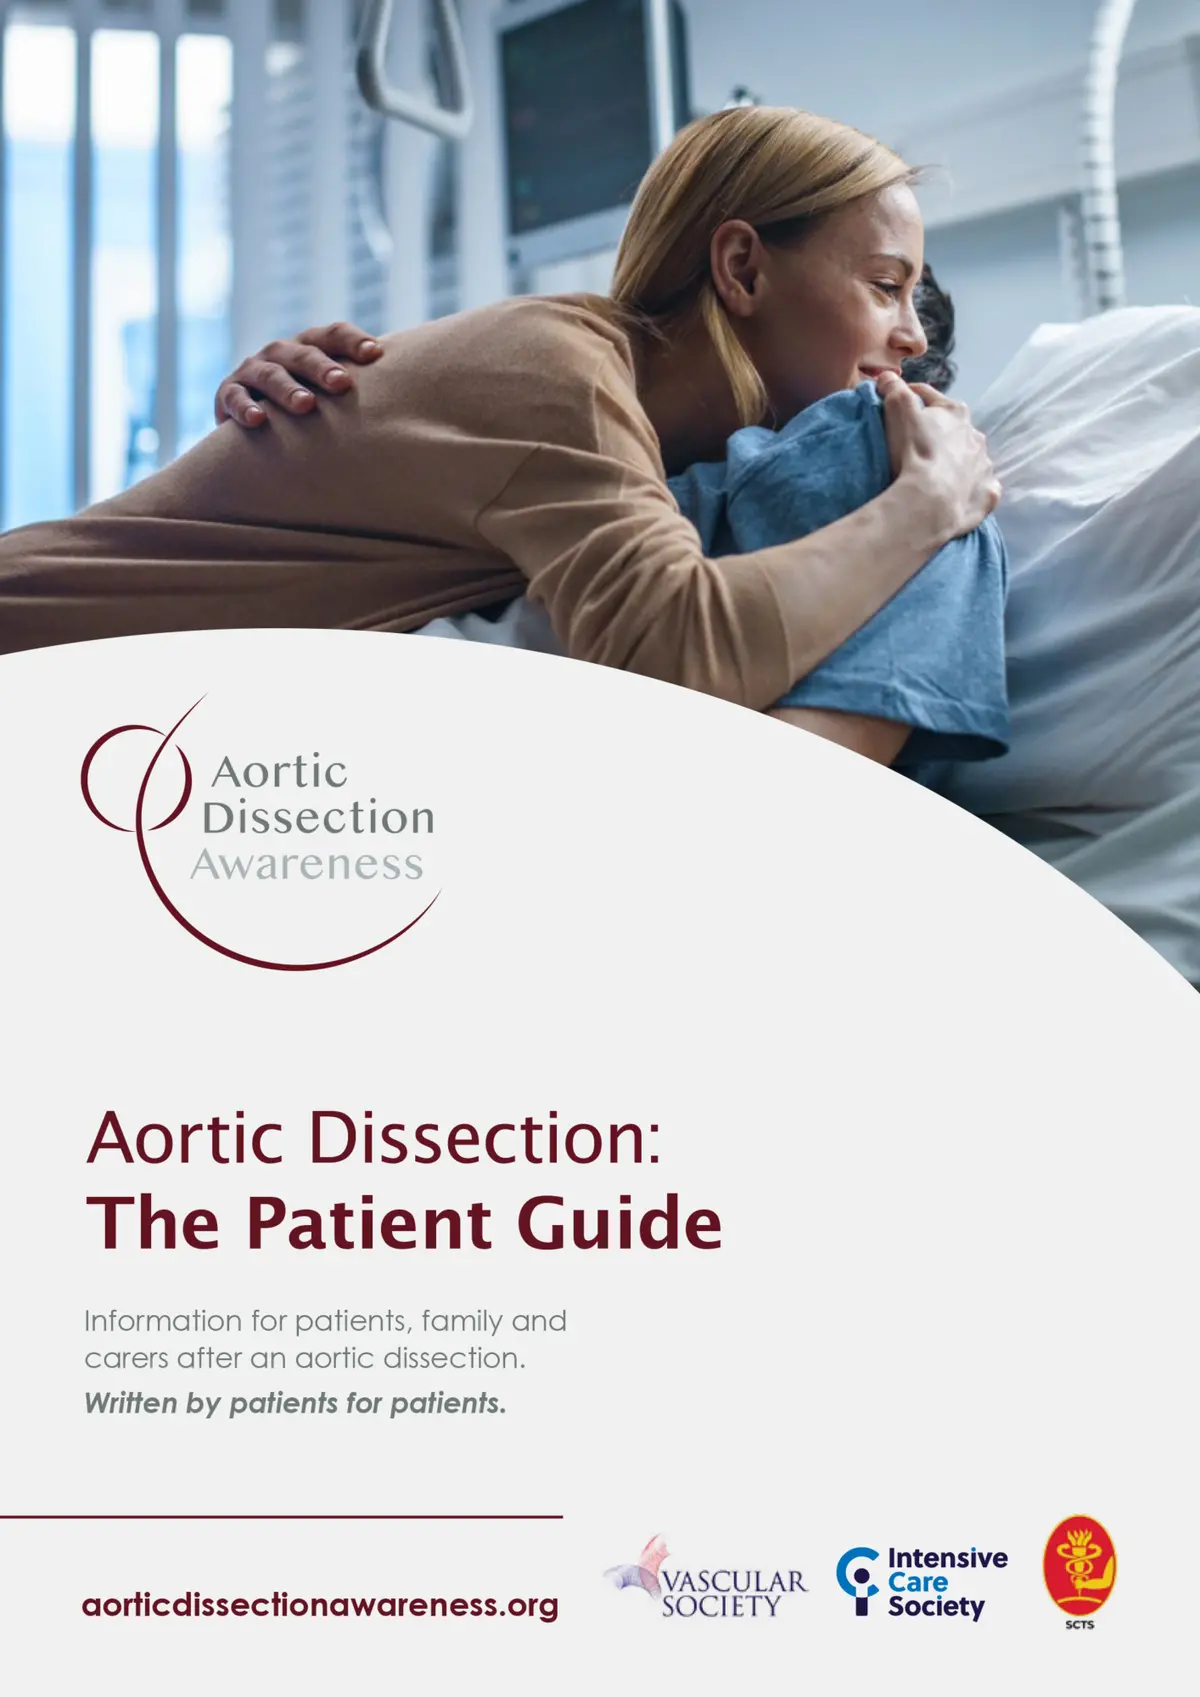 Aortic Dissection: The Patient Guide